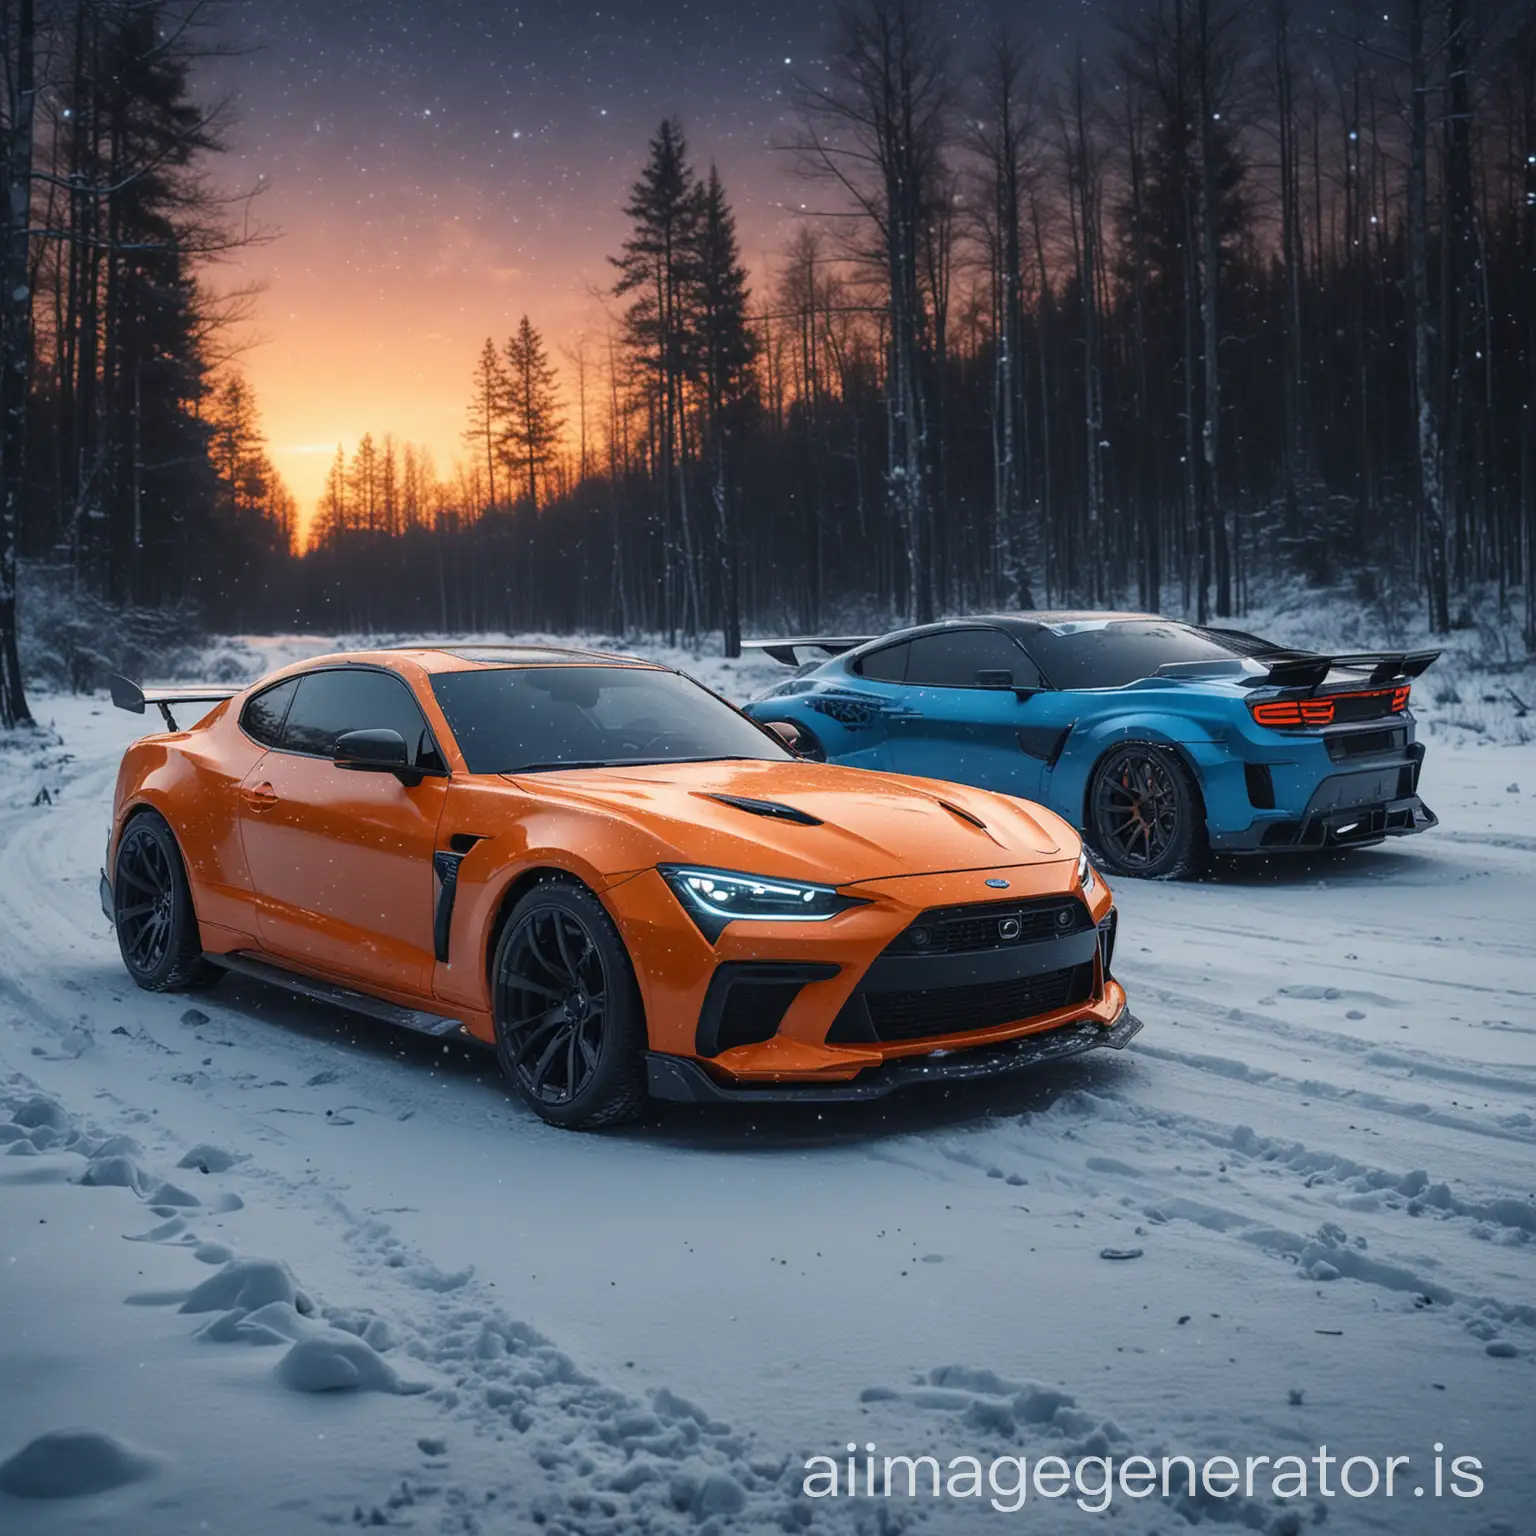 Futuristic-Concept-Sport-Blue-and-Orange-Tuned-Cars-Speeding-Through-Snowy-Forest-at-Night